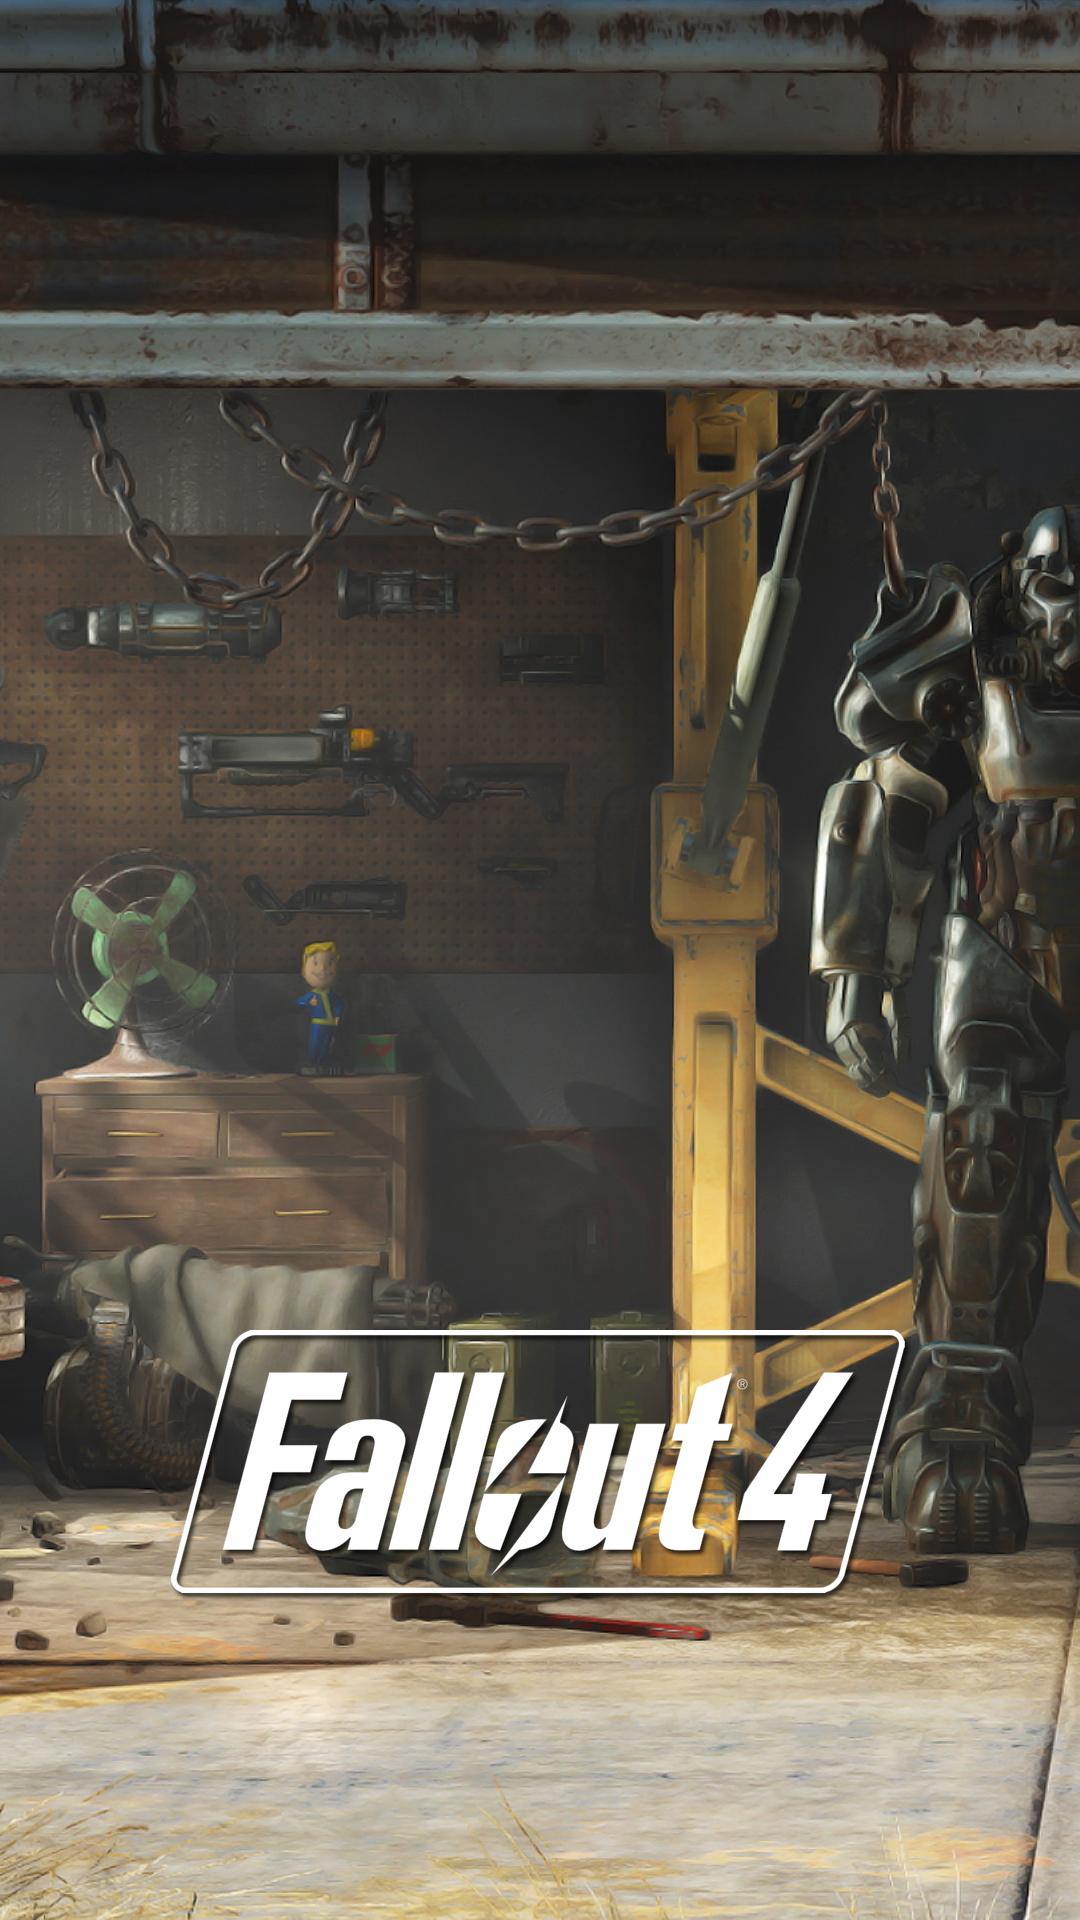 Free Download Fallout 4 Nieuws Prachtige Iphone En Android Wallpapers Voor Fallout 1080x19 For Your Desktop Mobile Tablet Explore 44 Fallout 4 Android Wallpaper Fallout 4 Wallpaper Hd Fallout 4 Desktop Wallpaper Fallout 4 Live Wallpaper